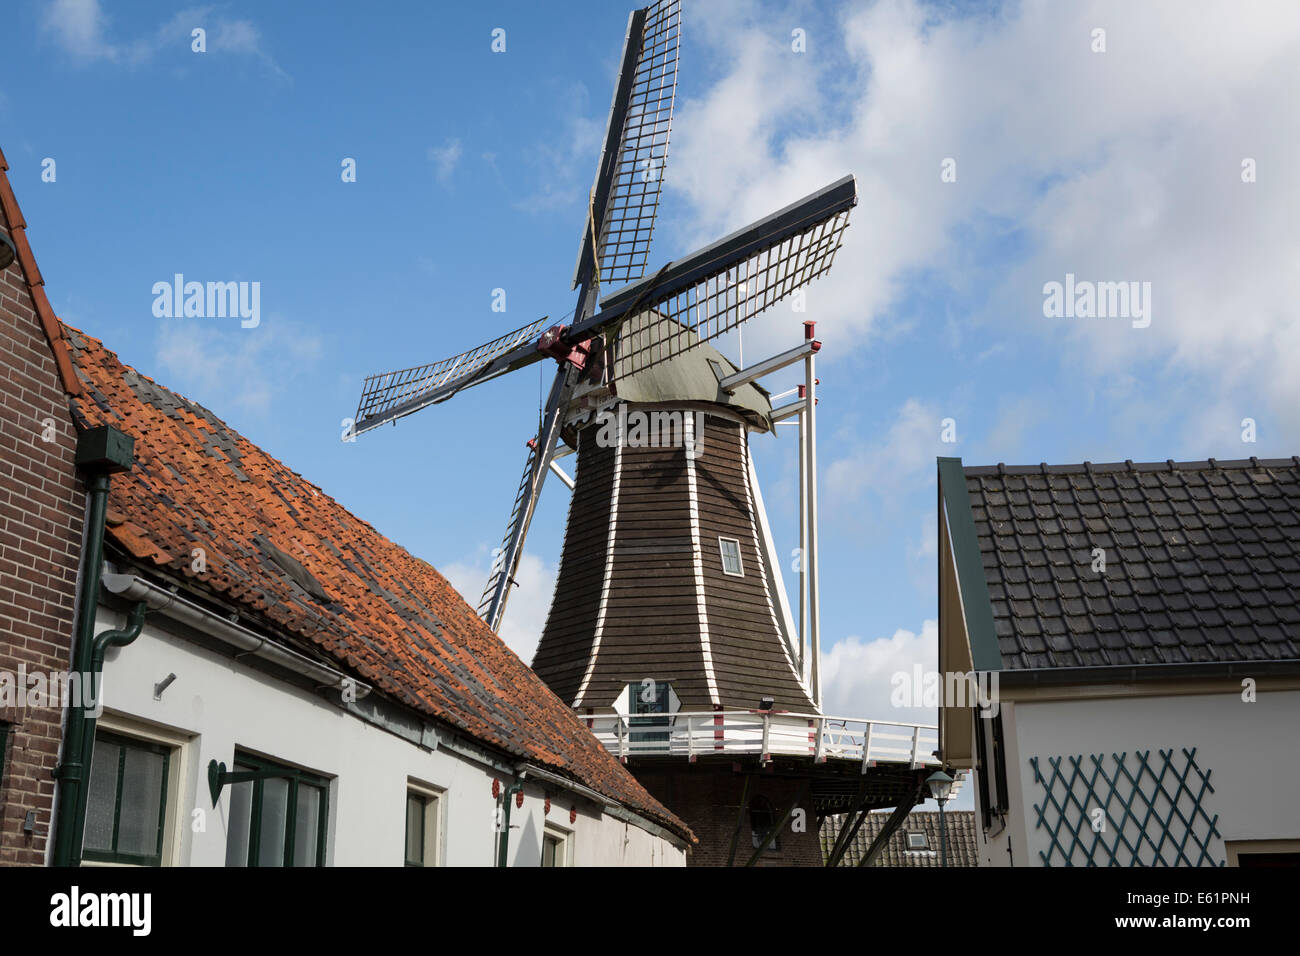 Windmill 'de Fortuin' or the Fortune at Hattem, a historical hanseatic city in the province of Gelderland in the Netherlands. Stock Photo